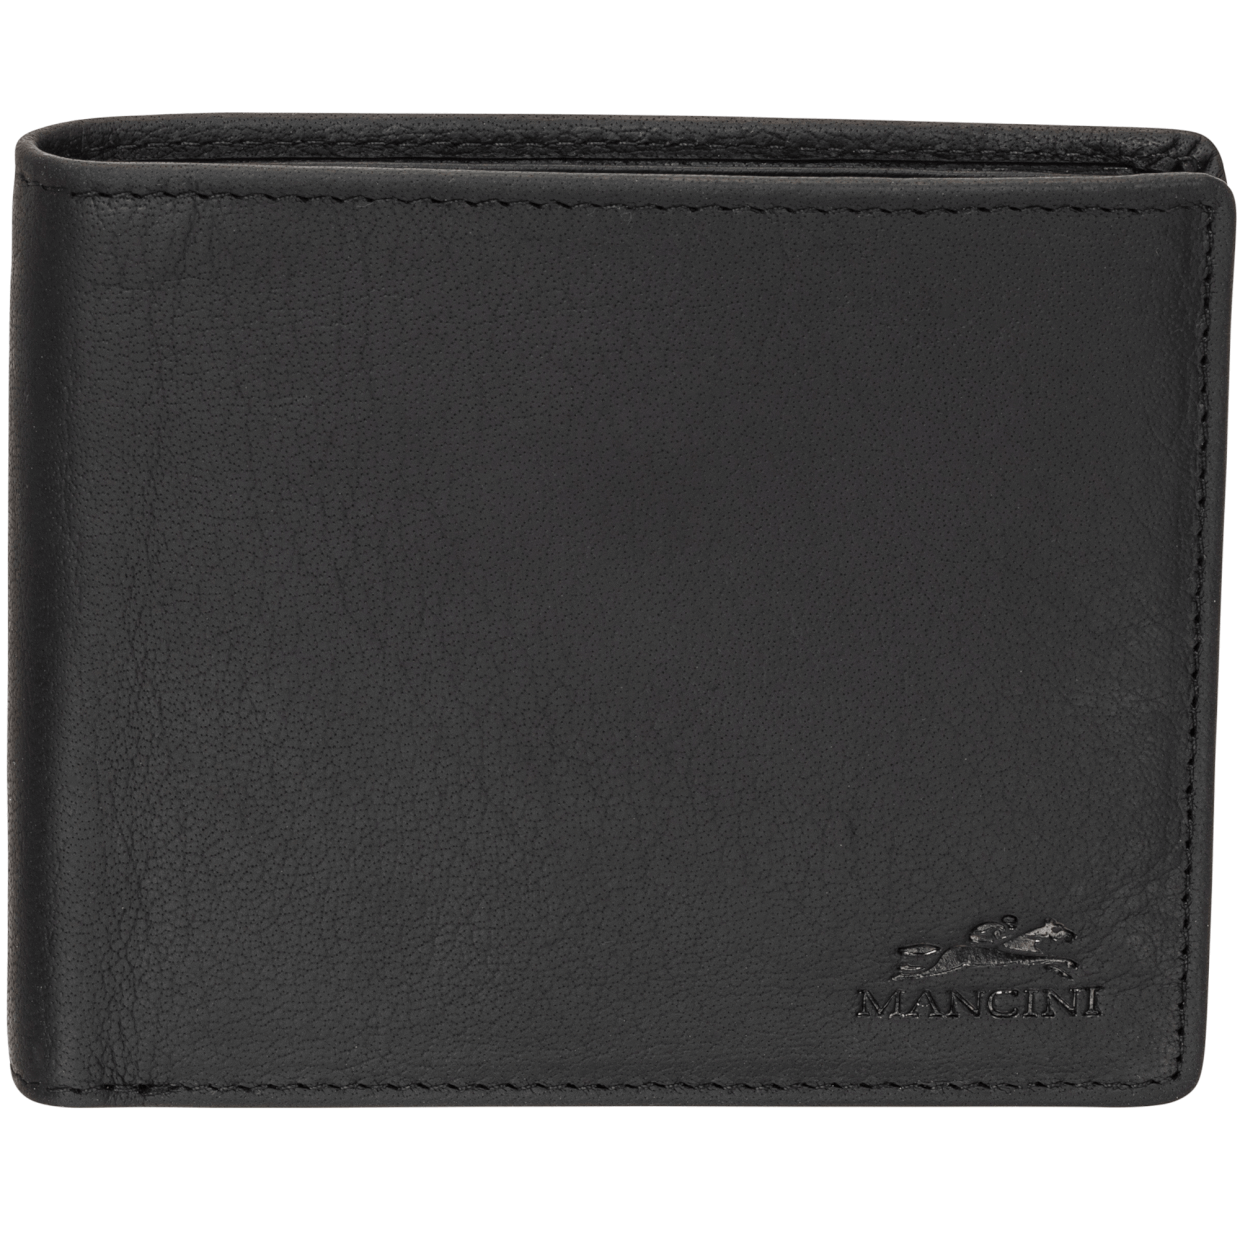 Mancini BUFFALO RFID Secure Wallet with Coin Pocket - Black